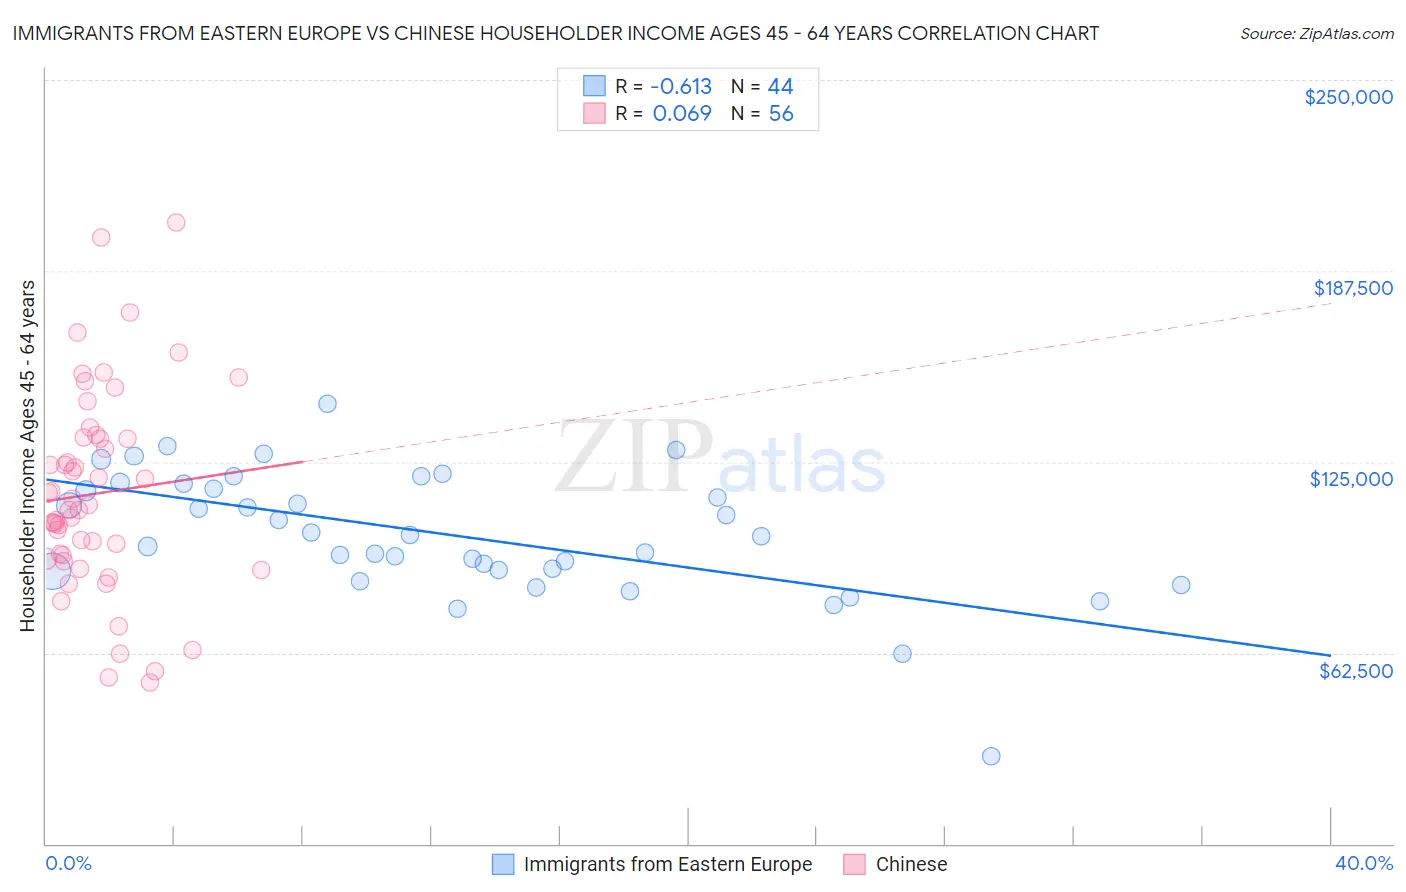 Immigrants from Eastern Europe vs Chinese Householder Income Ages 45 - 64 years